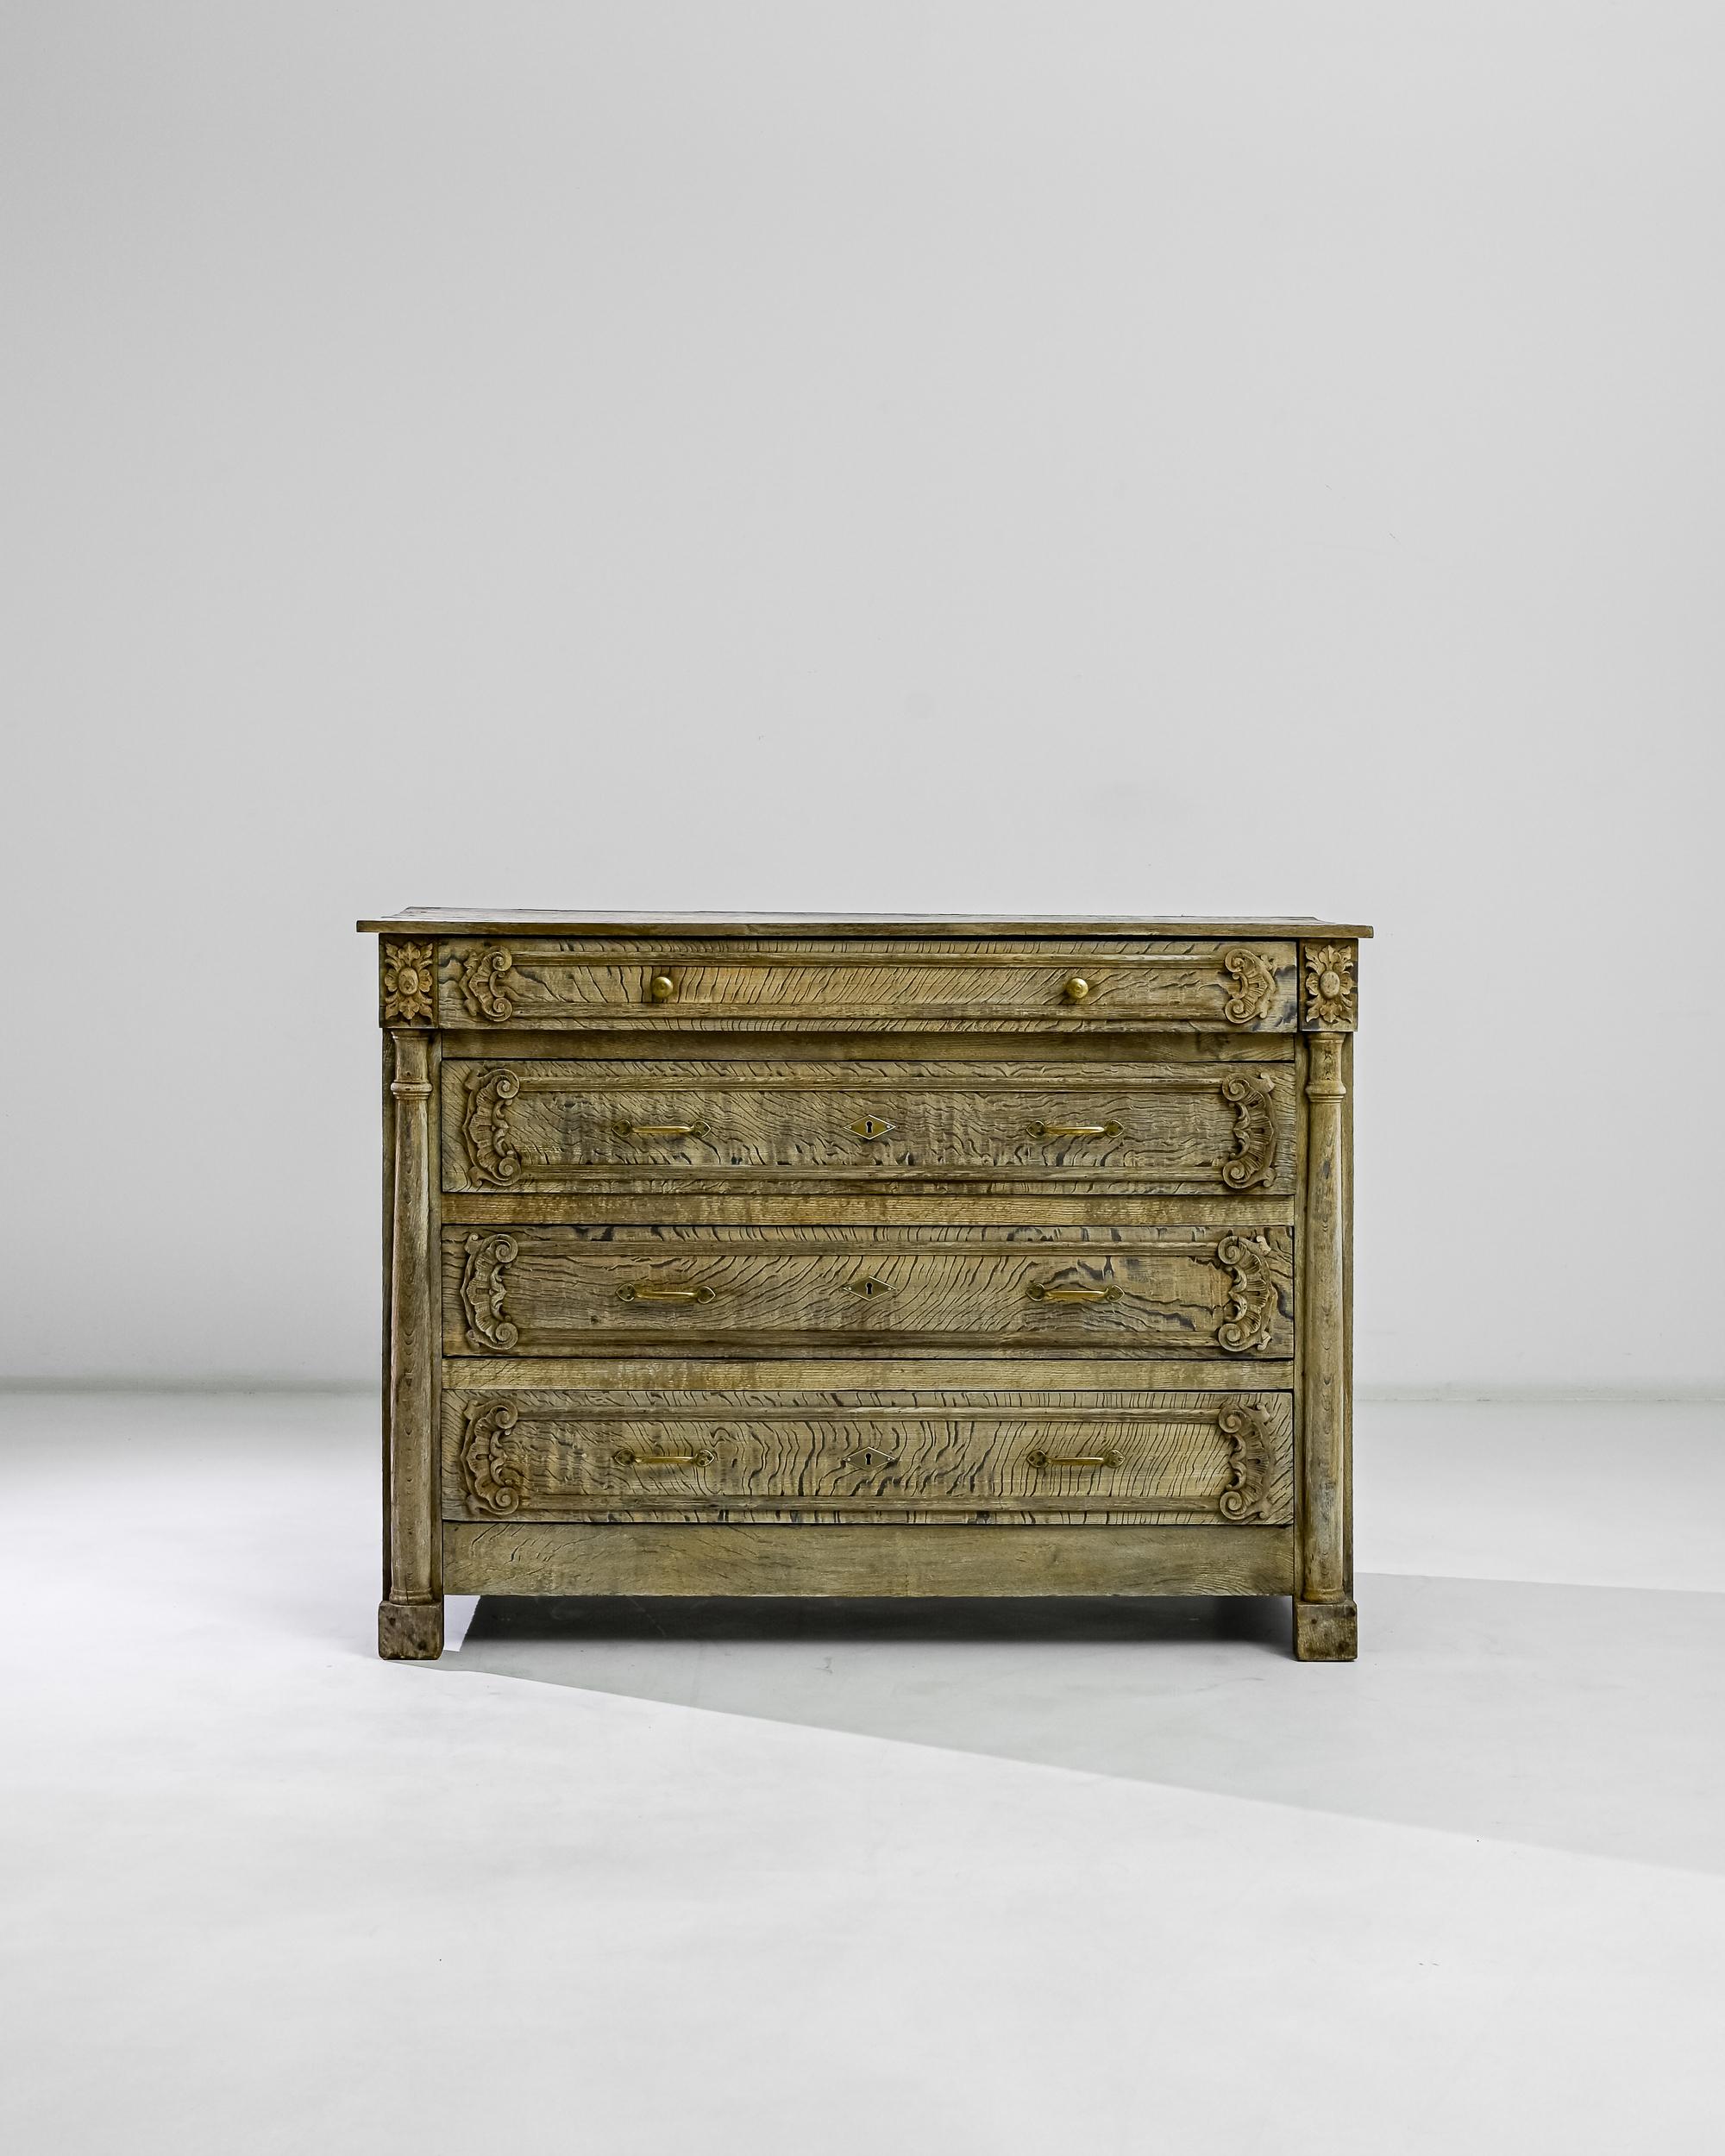 A bleached oak chest of drawers from France, produced circa 1850. A formal styled chest featuring four sliding drawers with original locks and keys and twin knobs of burnished metal. The painstaking, seamless craftsmanship of this chest is simply